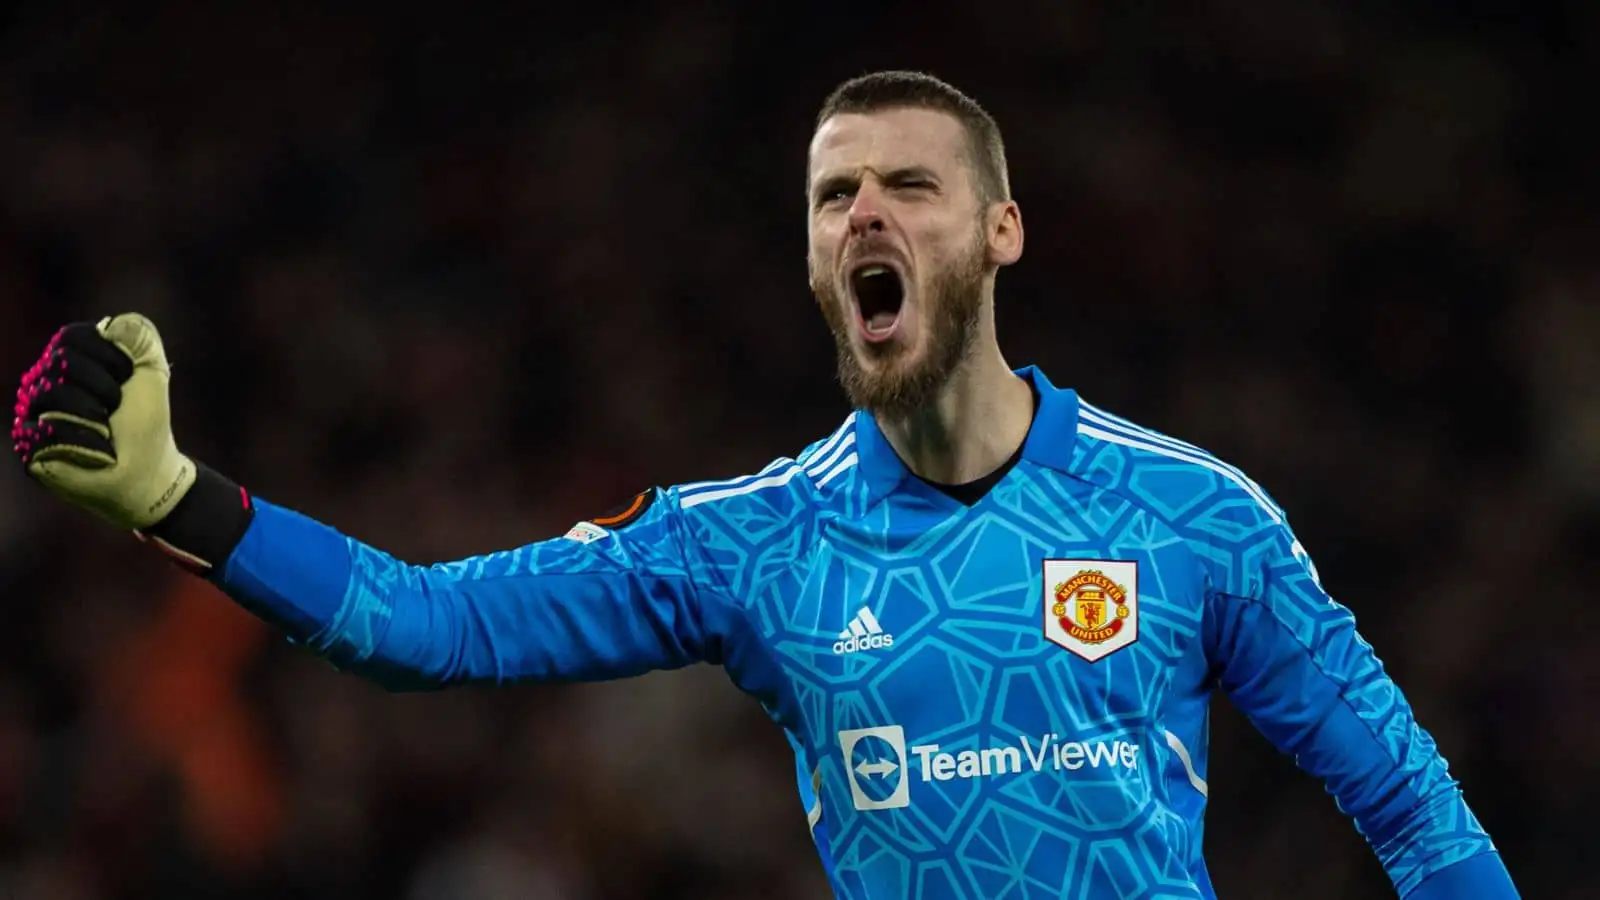 Manchester United's goalkeeper David de Gea celebrates his side's first goal during the UEFA Europa League play-off 2nd leg match between Manchester United and Barcelona in Manchester, Britain